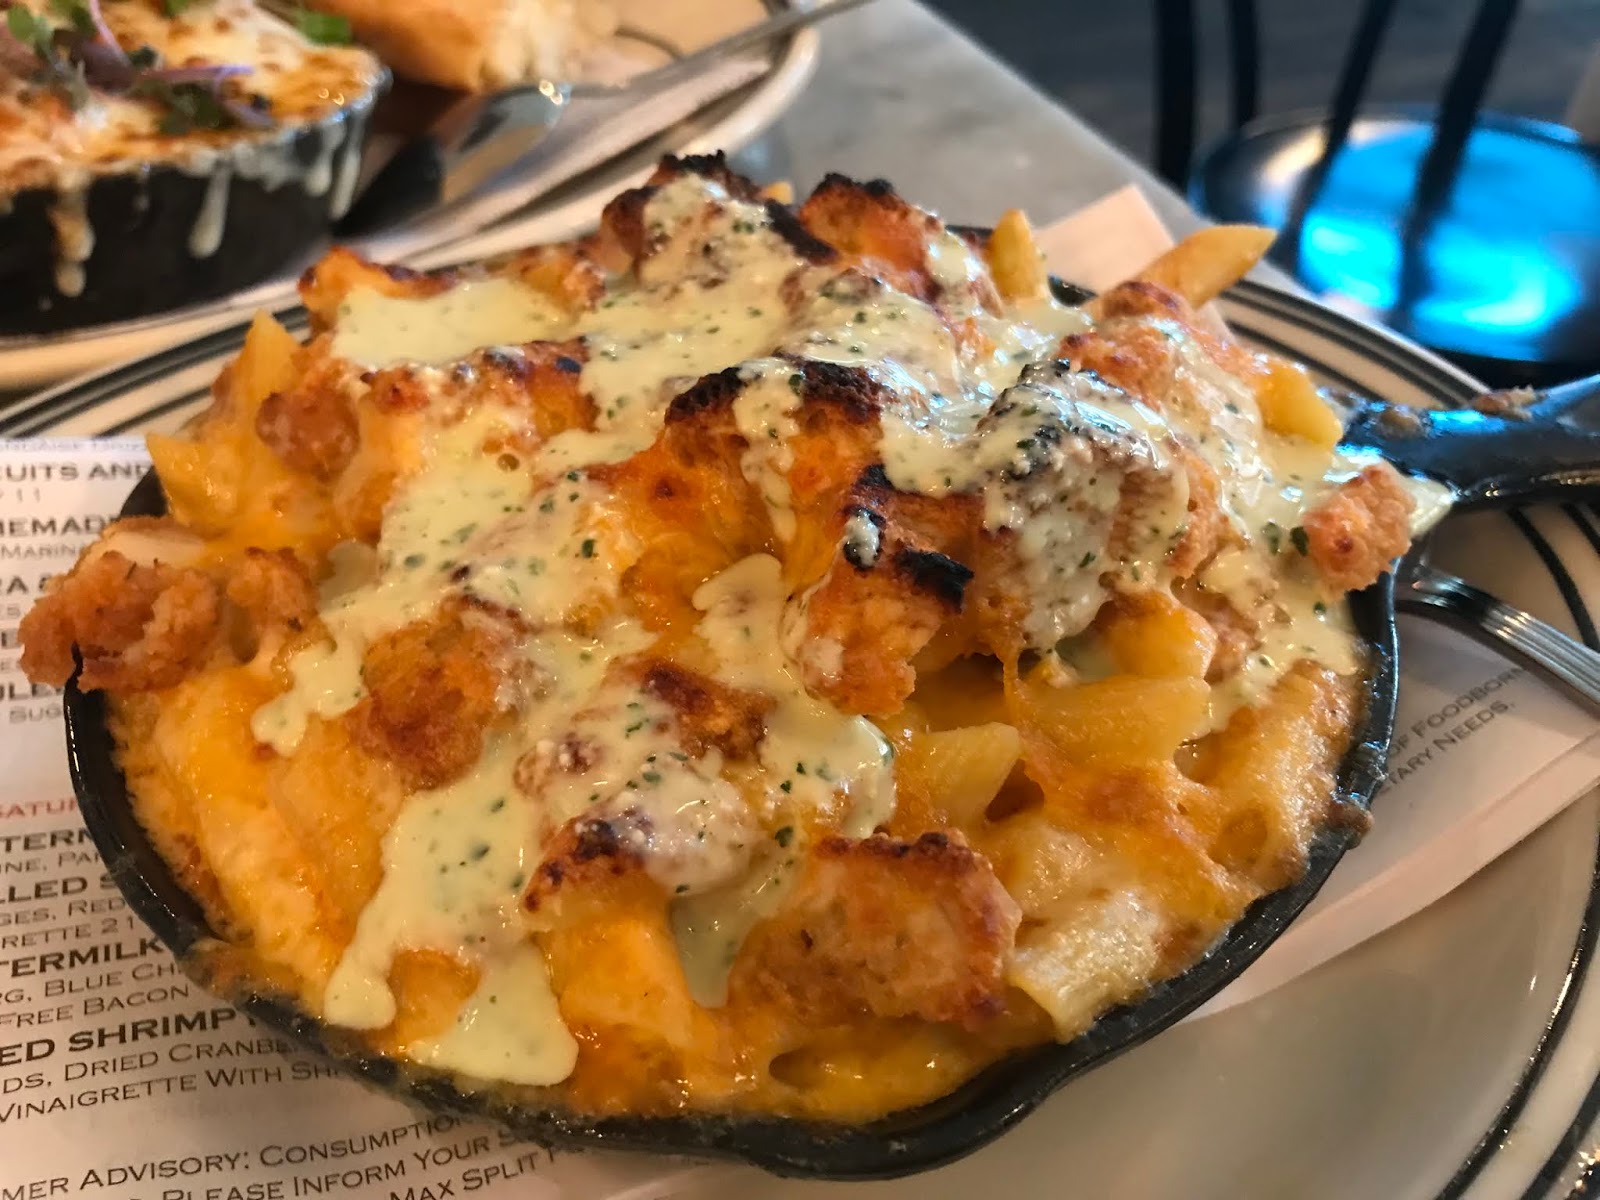 [NYC - UWS] Jacob's Pickles - Brunch review, so much cheese, so much ...